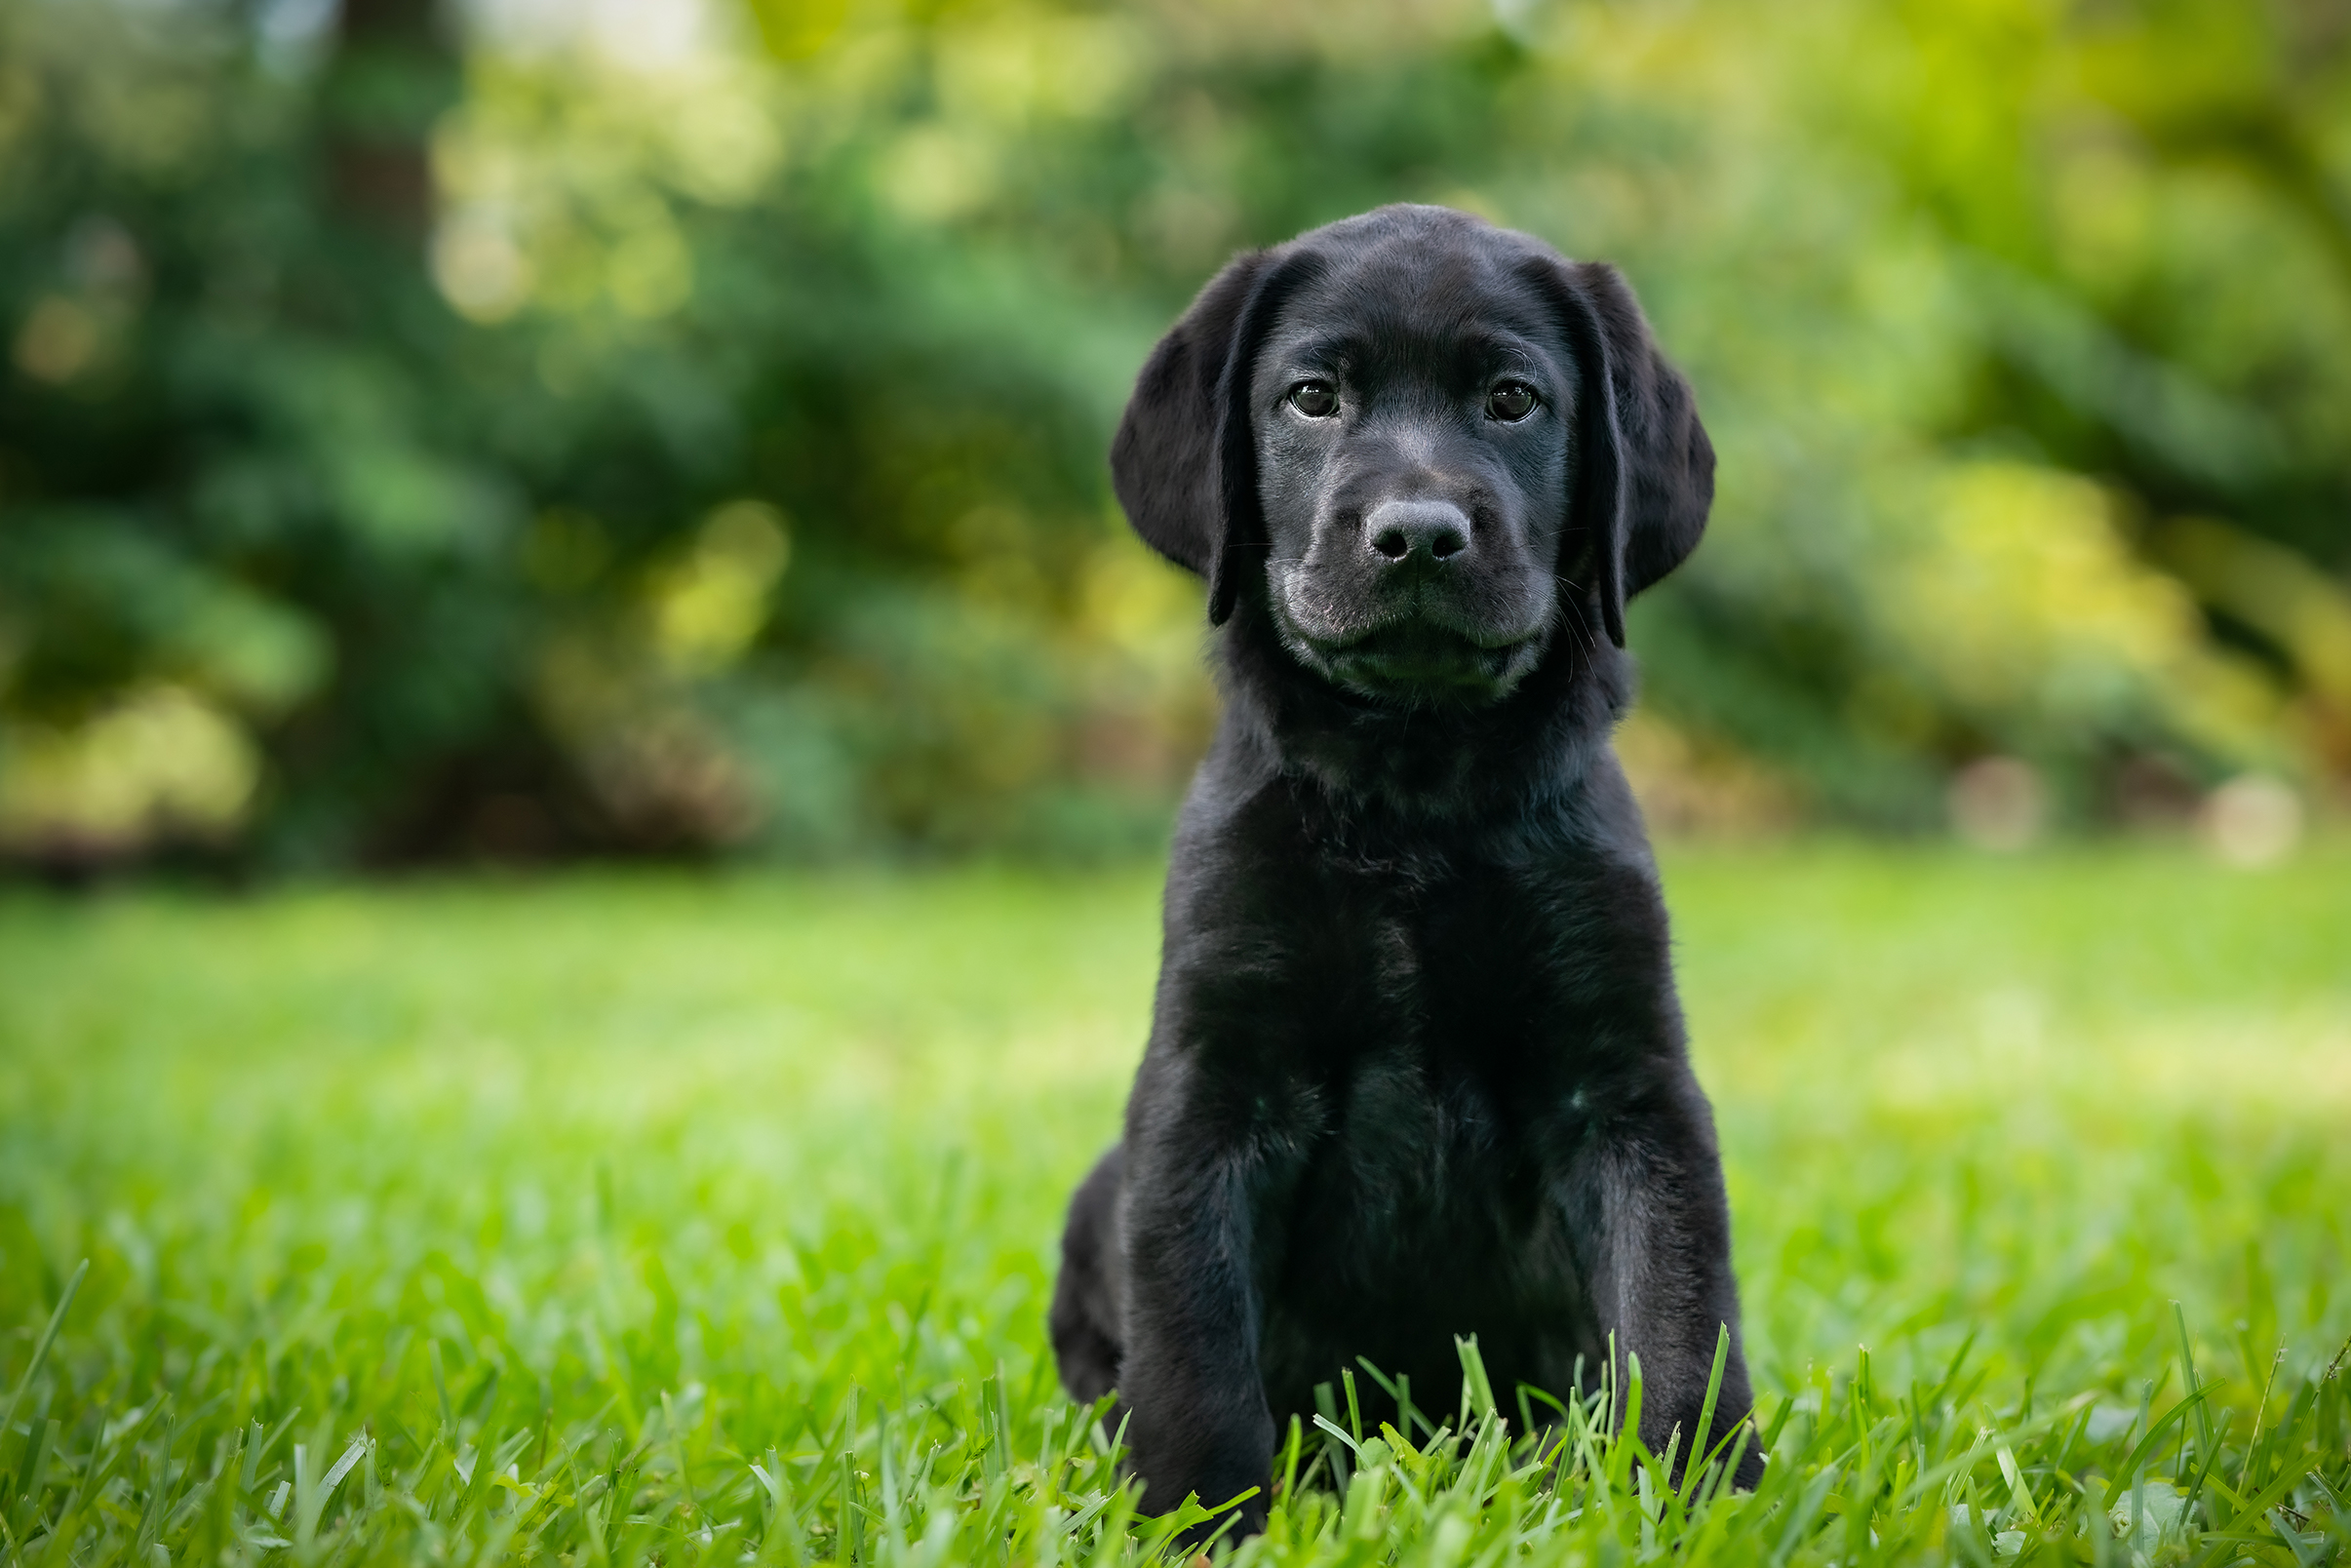 Black lab puppy sits in grass and looks at the camera